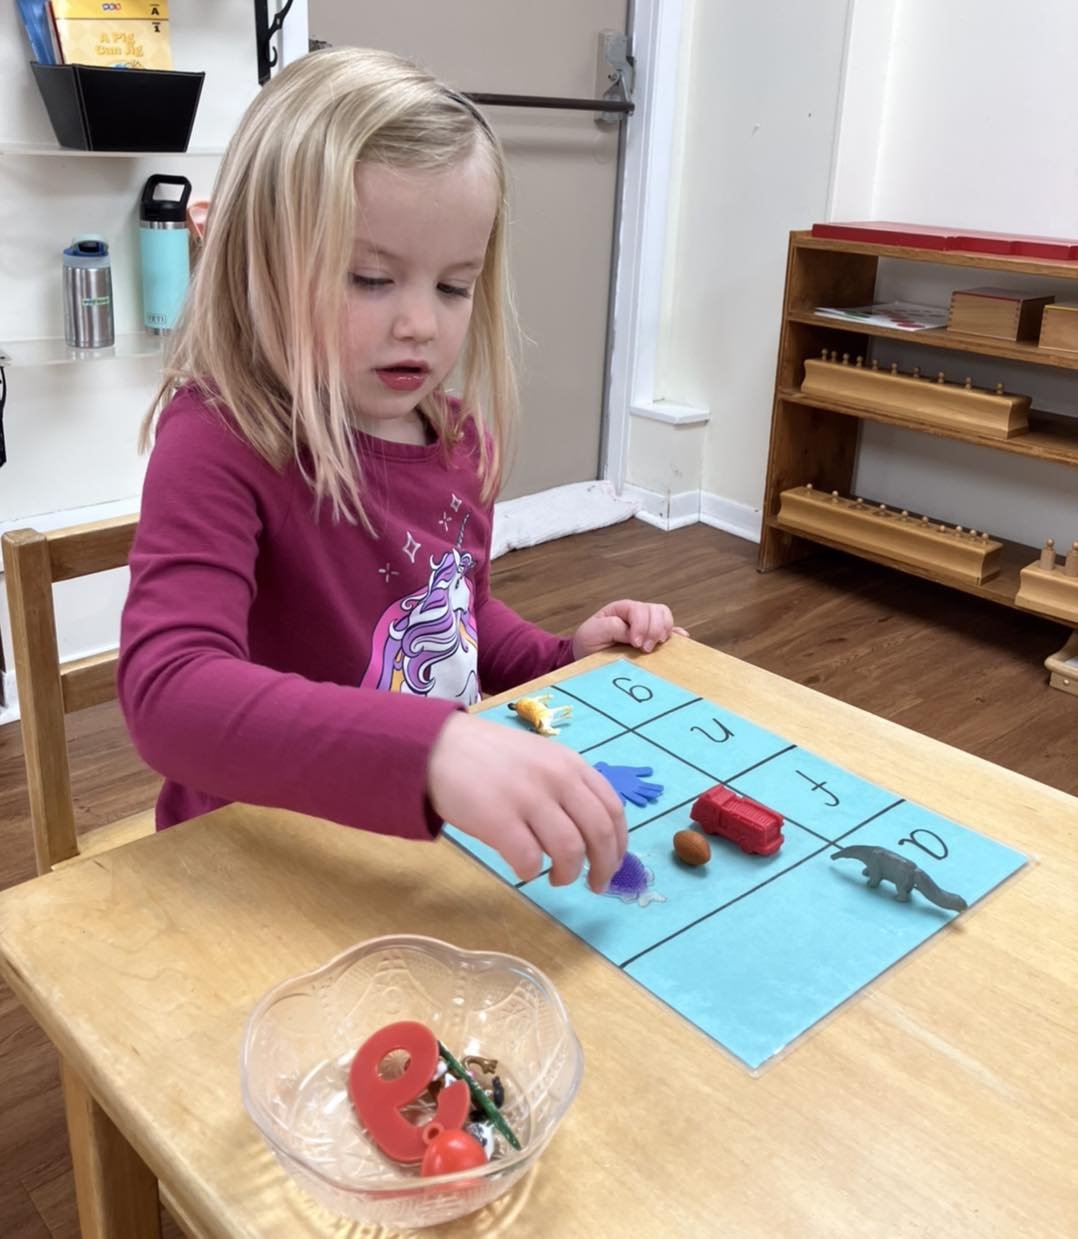 Our MCH preschoolers discover their classroom environment and flourish with independence and stamina during the work cycle. Growth is such a wonderful journey to witness!

#Montessori #MontessoriSchool #MontessoriKids #MontessoriClassroom #PreschoolA